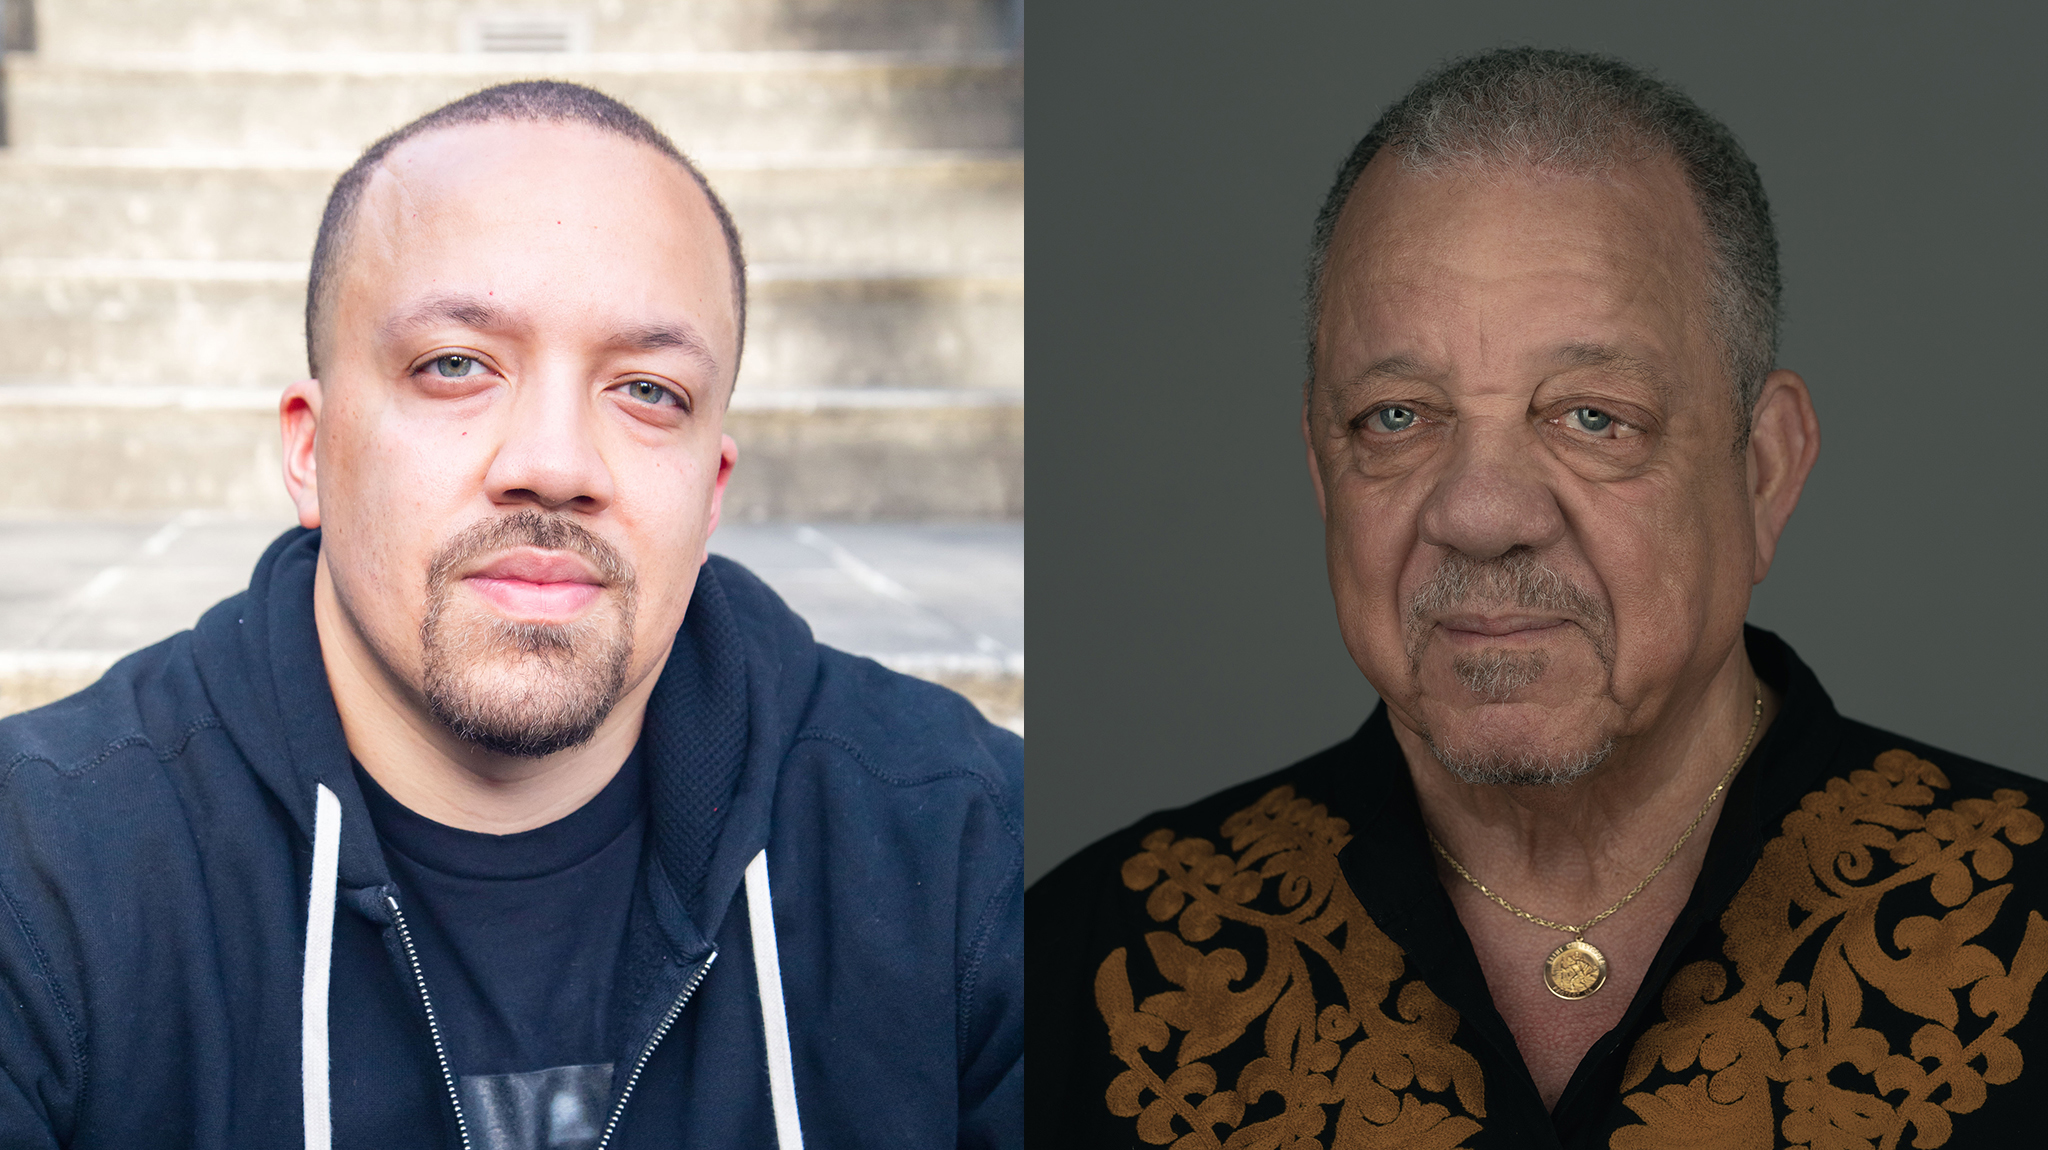 Authors David Dennis Jr. (left) and David Dennis Sr. are set to visit the University of Mississippi on Oct. 25 to discuss their book, ‘The Movement Made Us: A Father, a Son and a Legacy of a Freedom Ride.’ Submitted photos